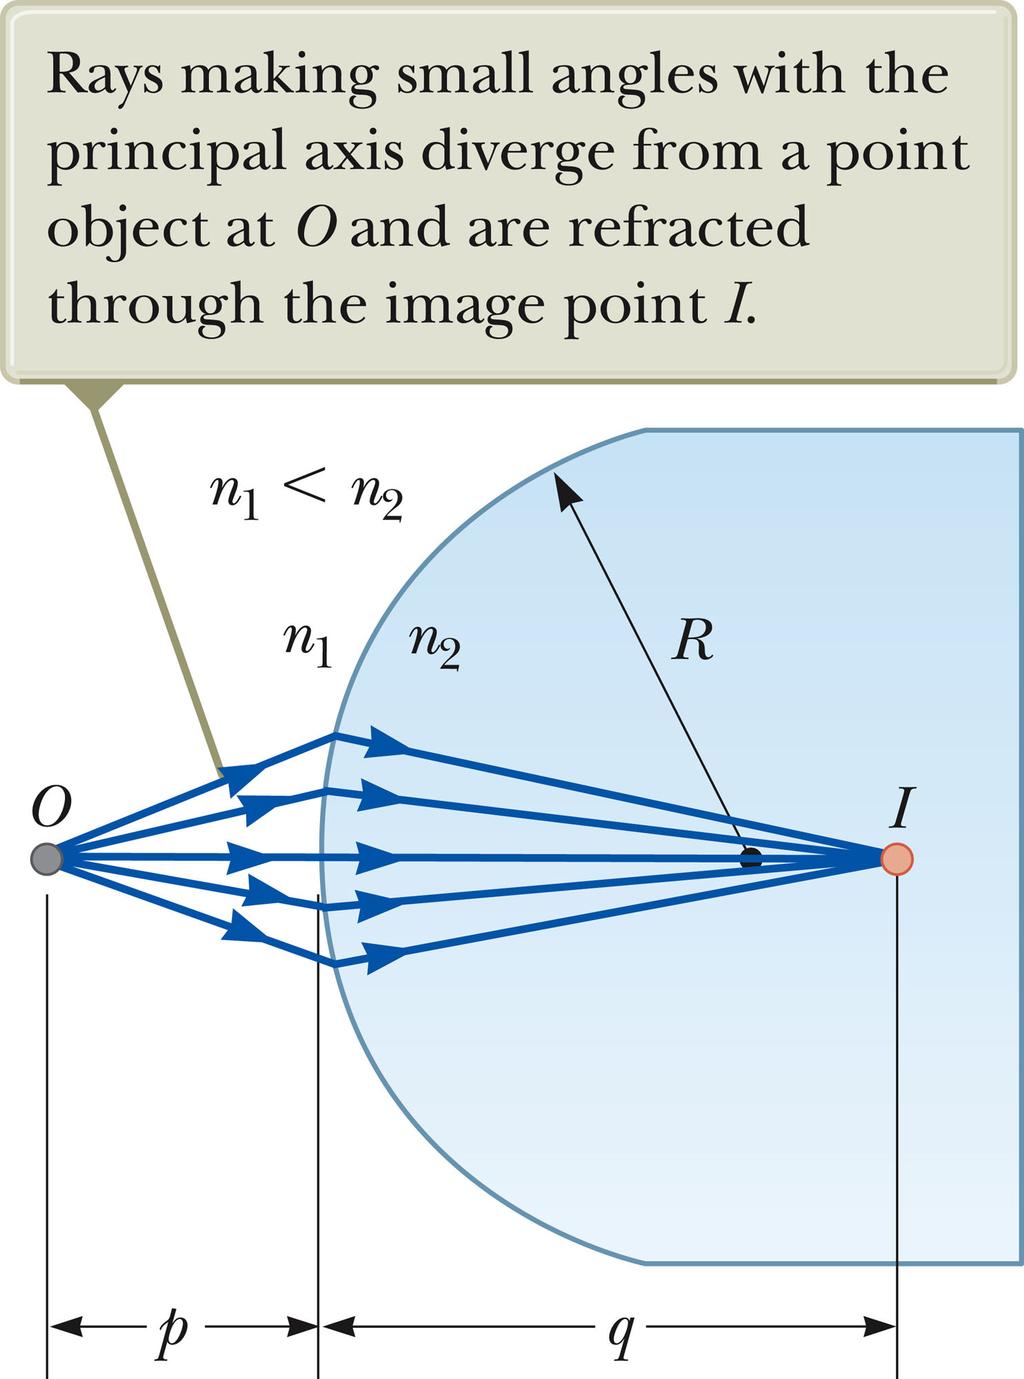 Spherical mirror equation Spherical mirror equation Parallel rays along the optical axis are focused at the focal point, a distance f from the mirror. The focal length of a spherical mirror is f= R/2.